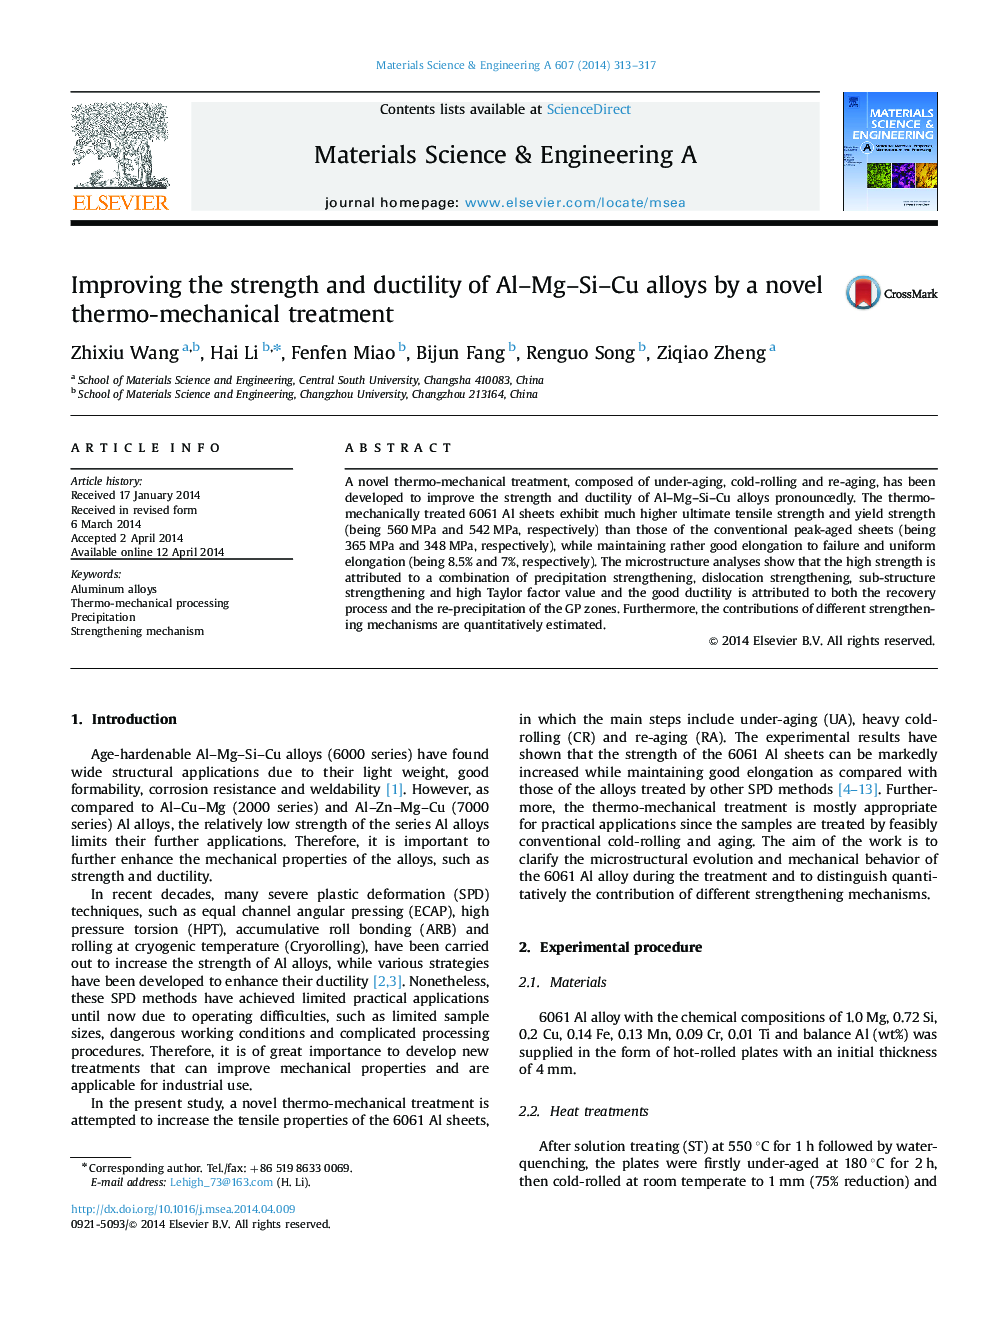 Improving the strength and ductility of Al-Mg-Si-Cu alloys by a novel thermo-mechanical treatment